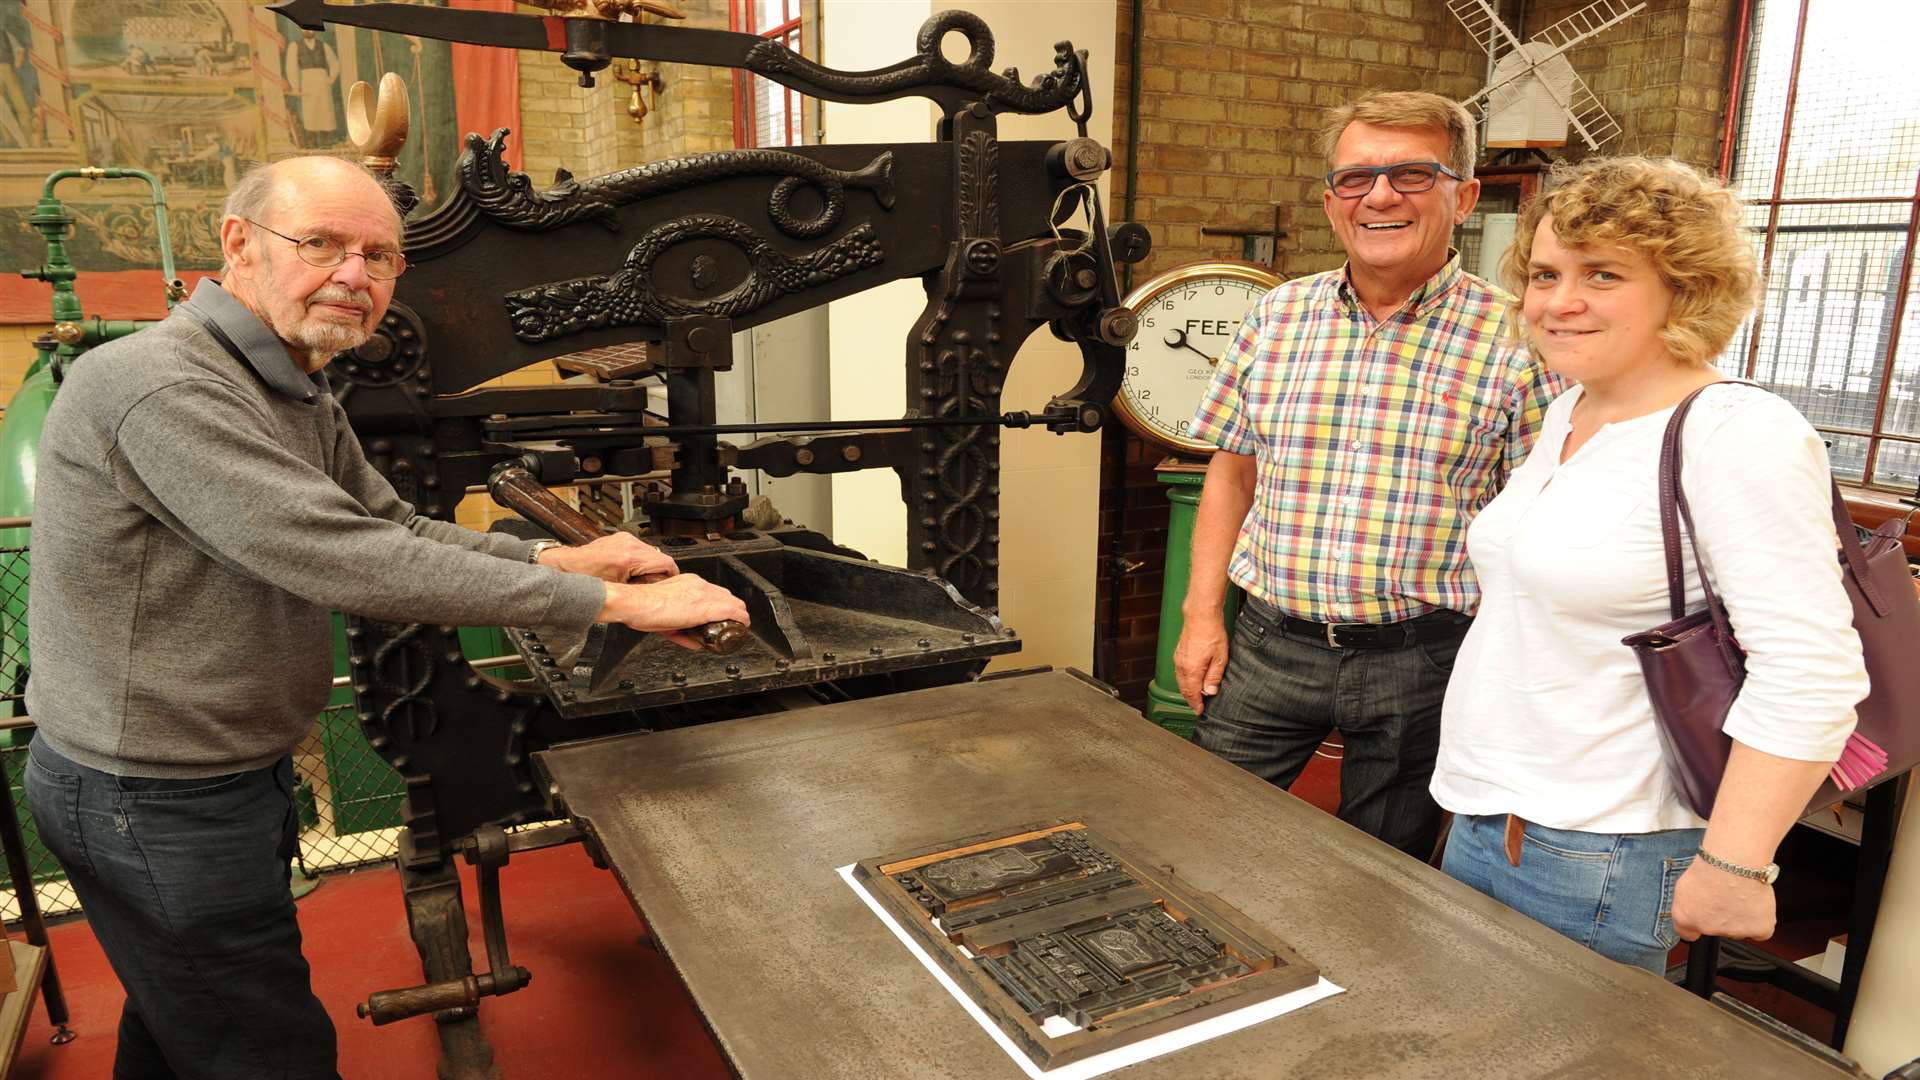 Mike Peevers with Michael Hoyle and Fiona Waddington with the Victorian printing press